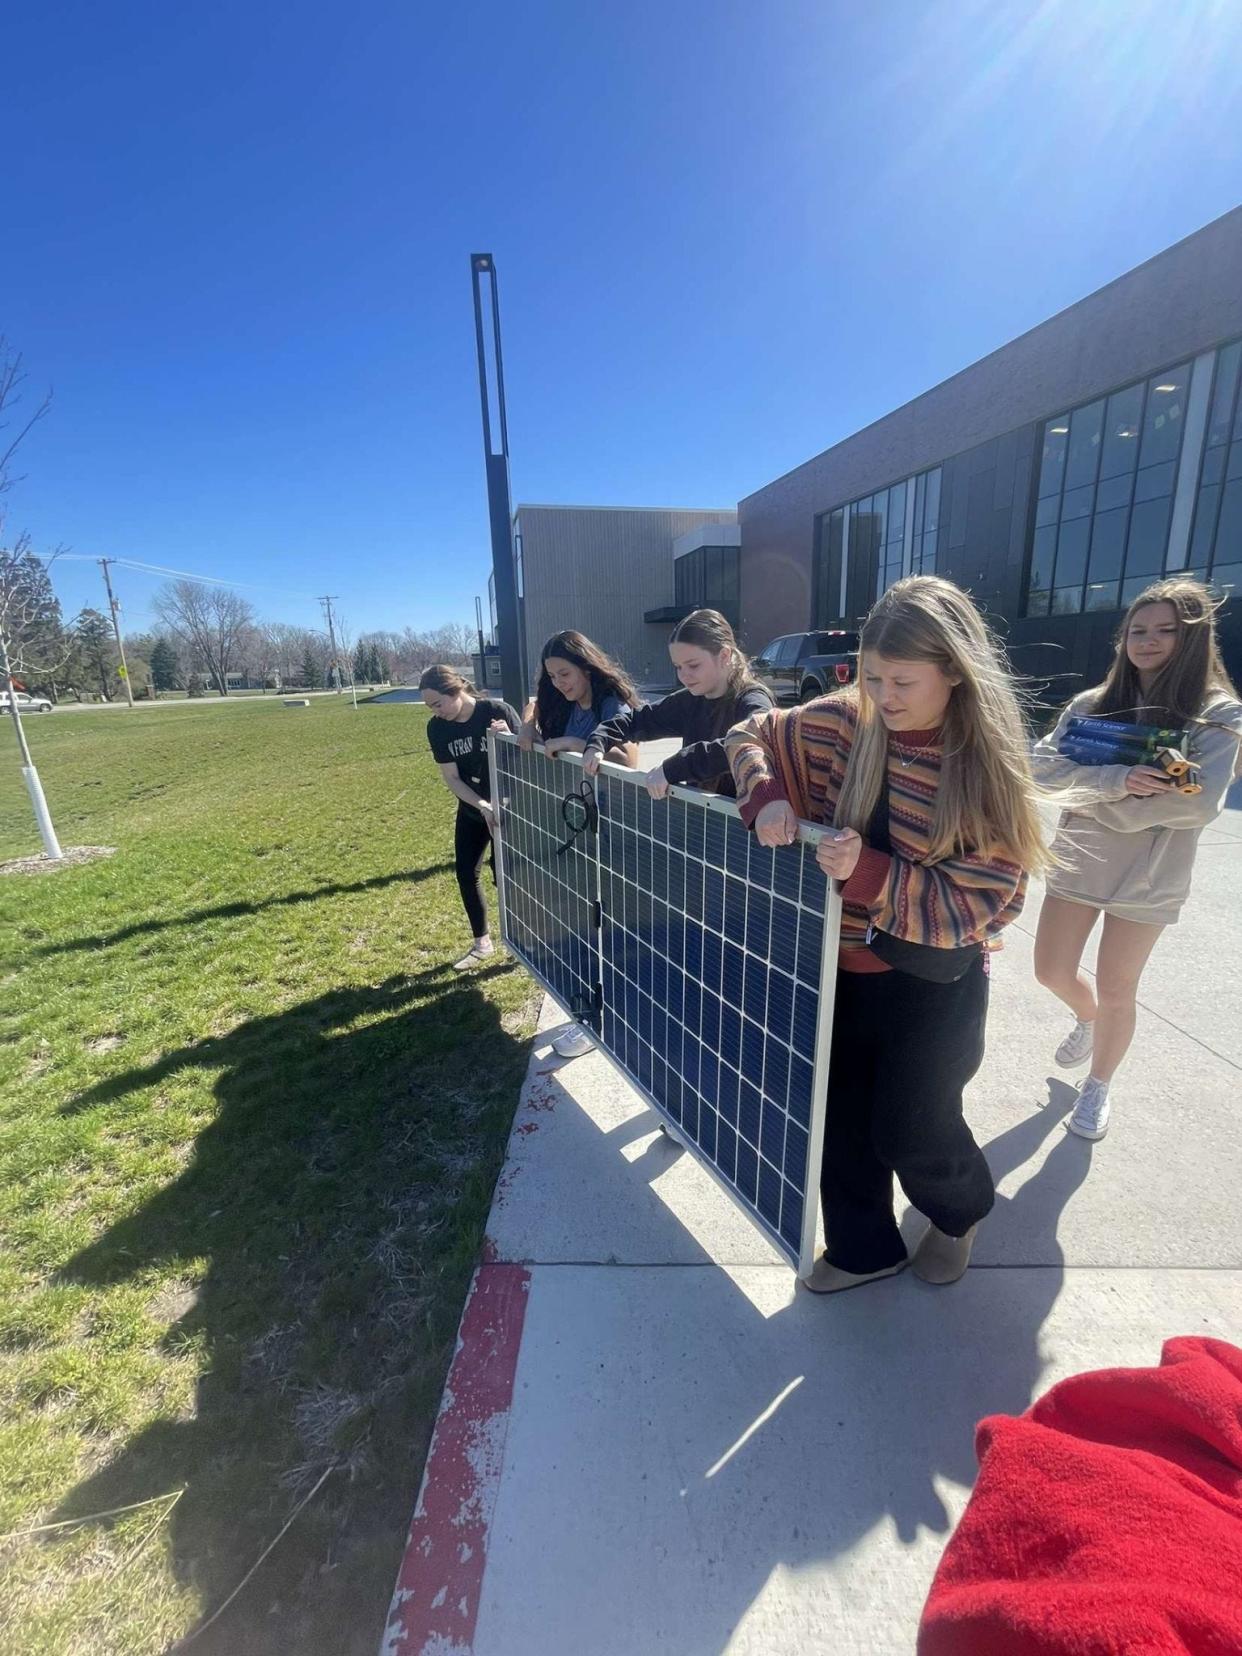 A group of Ames High School students who call themselves "Solar Rangers" have taken their science project on solar panels to the district as a possible energy alternative.